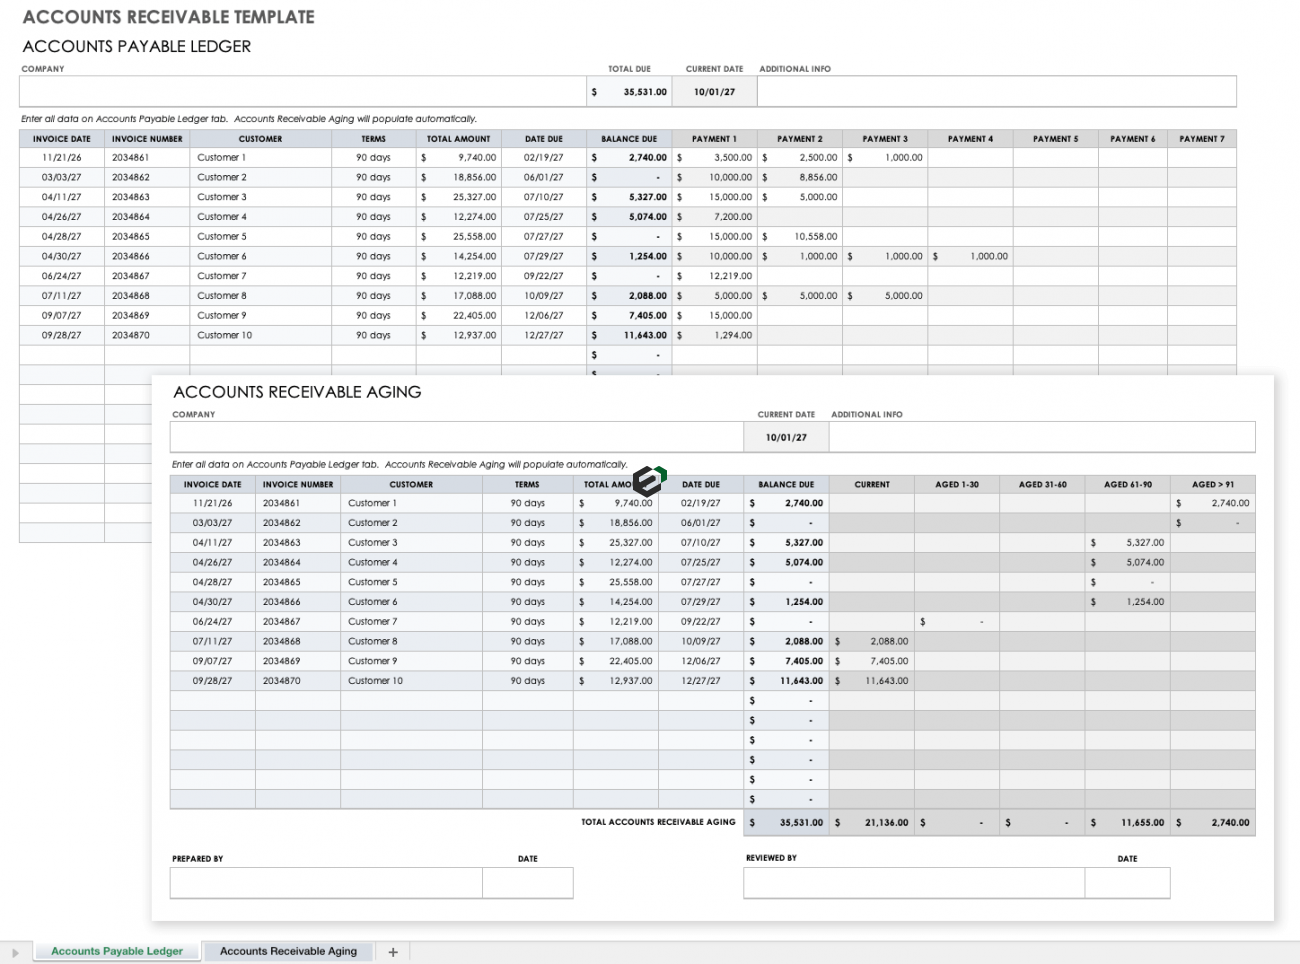 Accounts Receivable template in Excel by Exceldownloads.com Feature Image